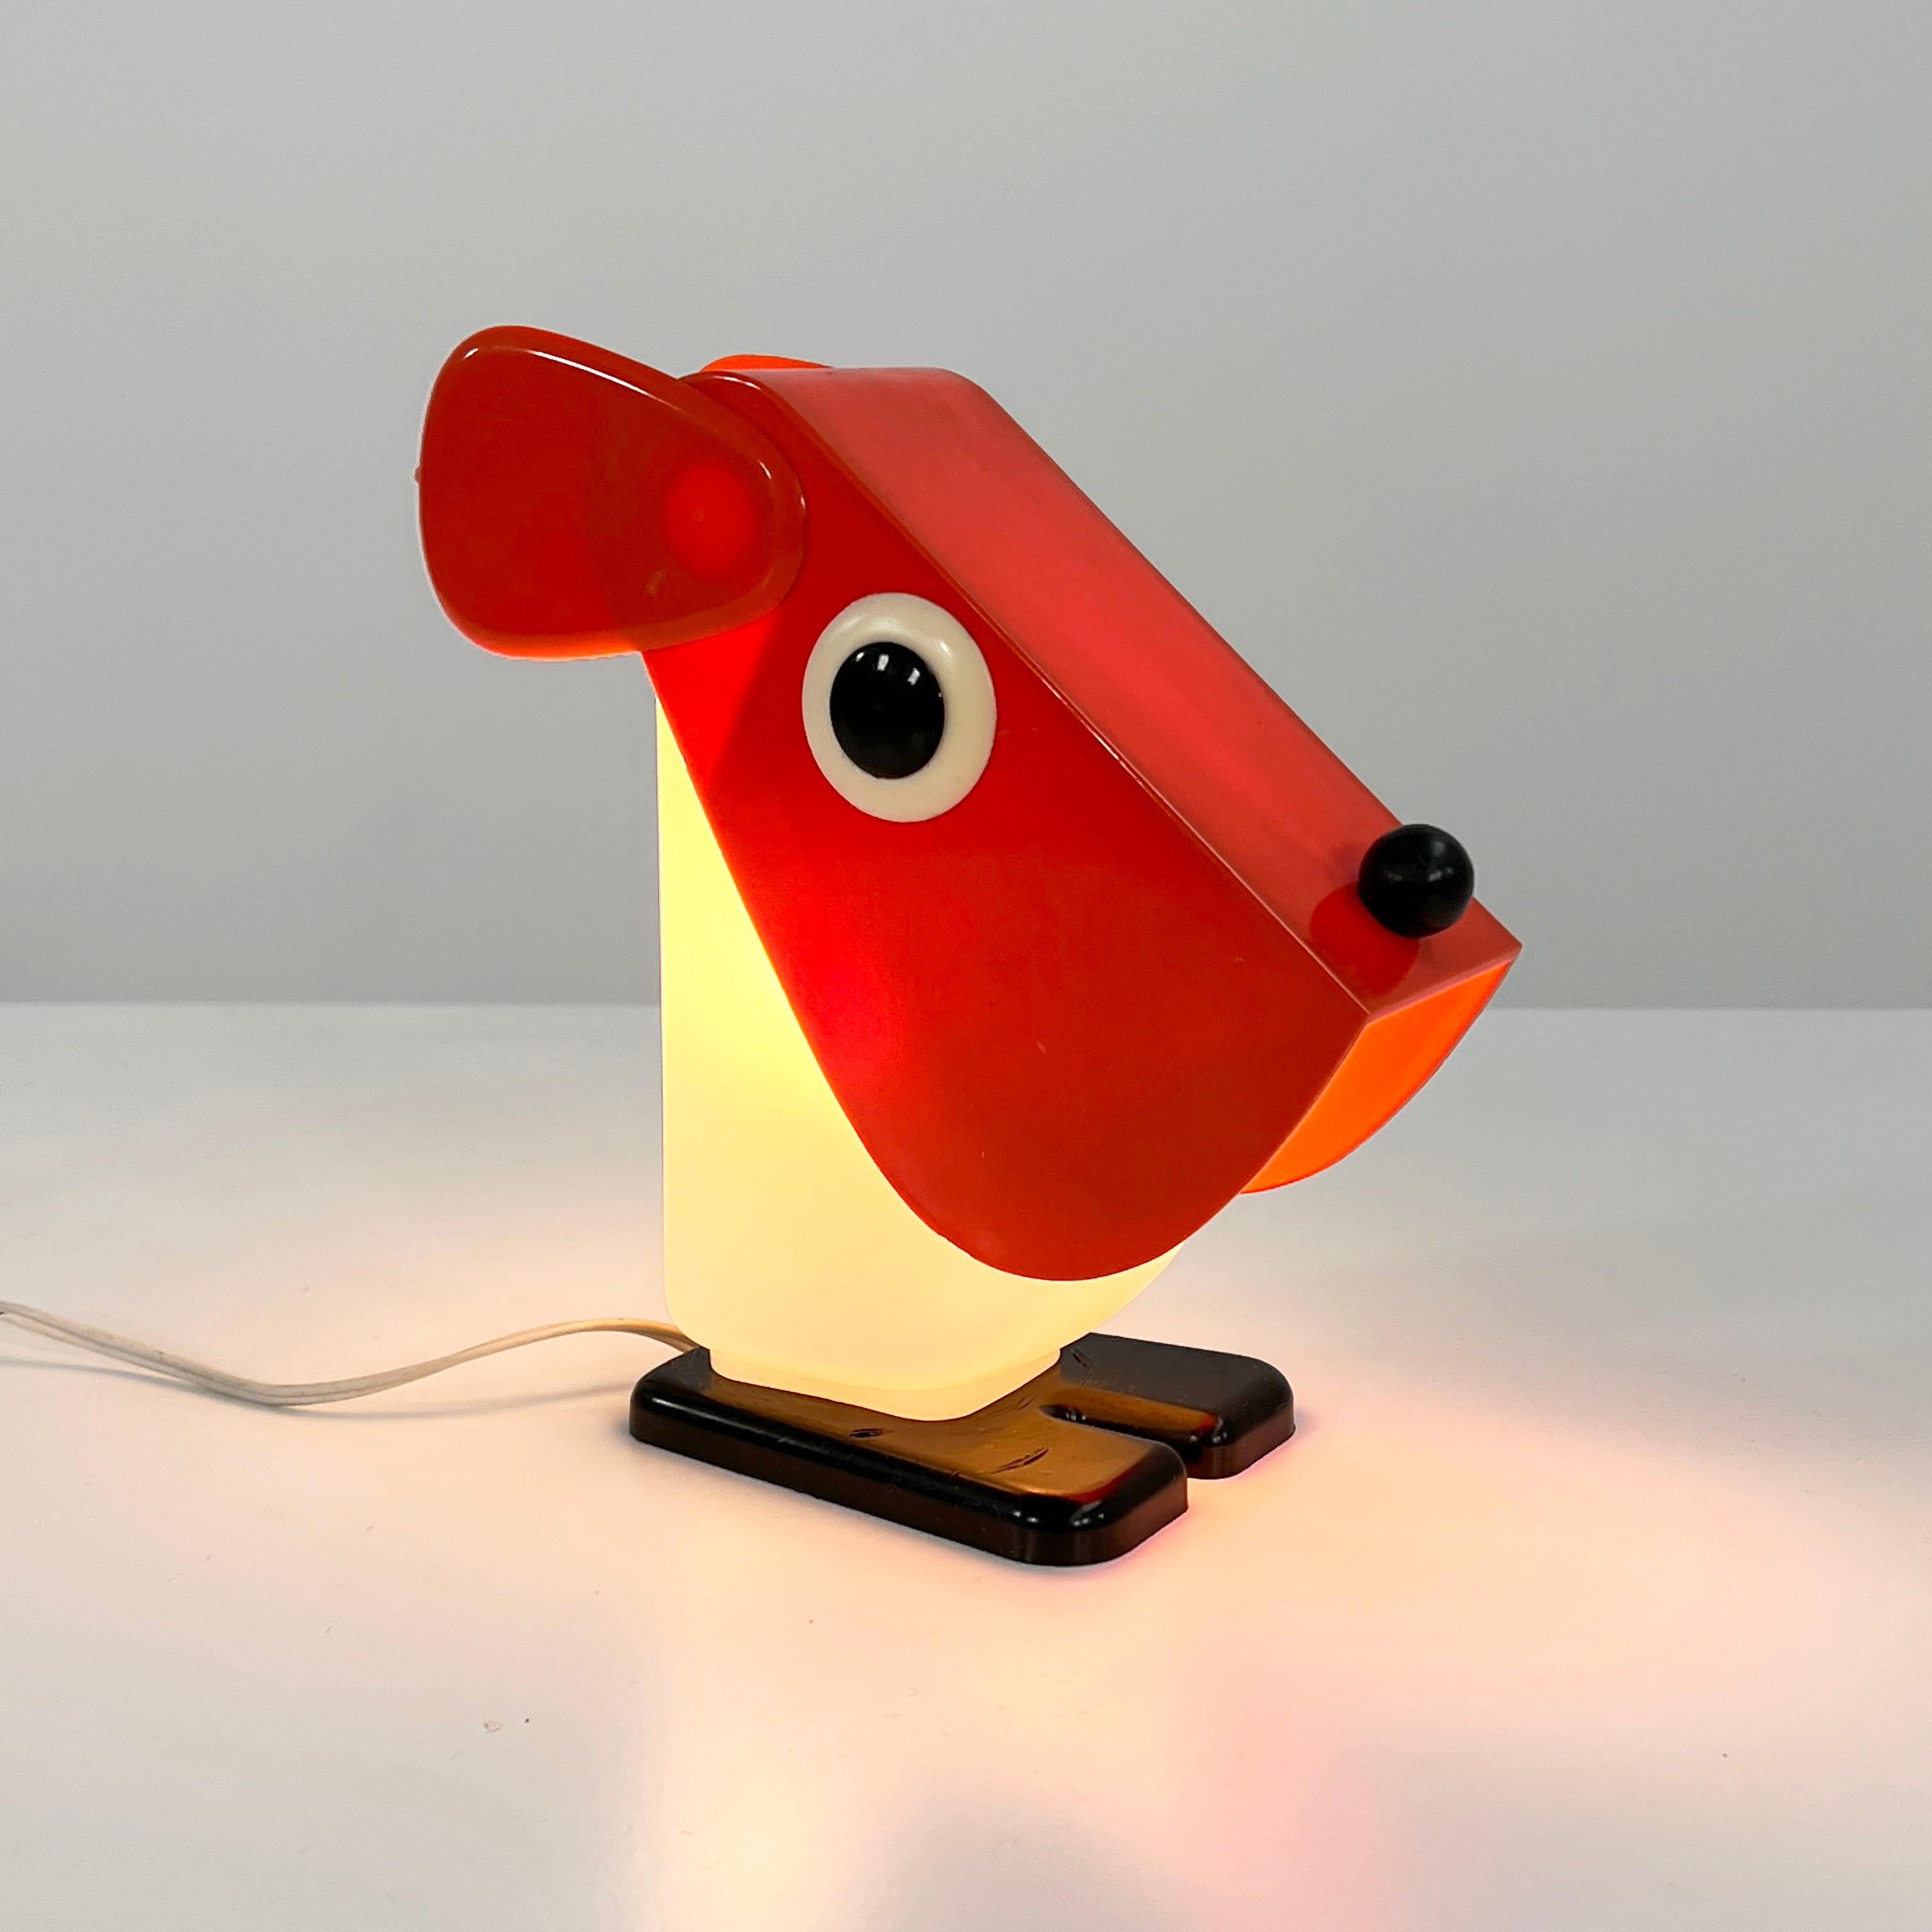 Designer - Fernando Cassetta 
Producer - Tacman
Model - Dog Table Lamp 
Design Period - Seventies
Measurements - Width 8 cm x Depth 18 cm x Height 20 cm
Materials - Plastic
Color - White, Red, Black
Light wear consistent with age and use.